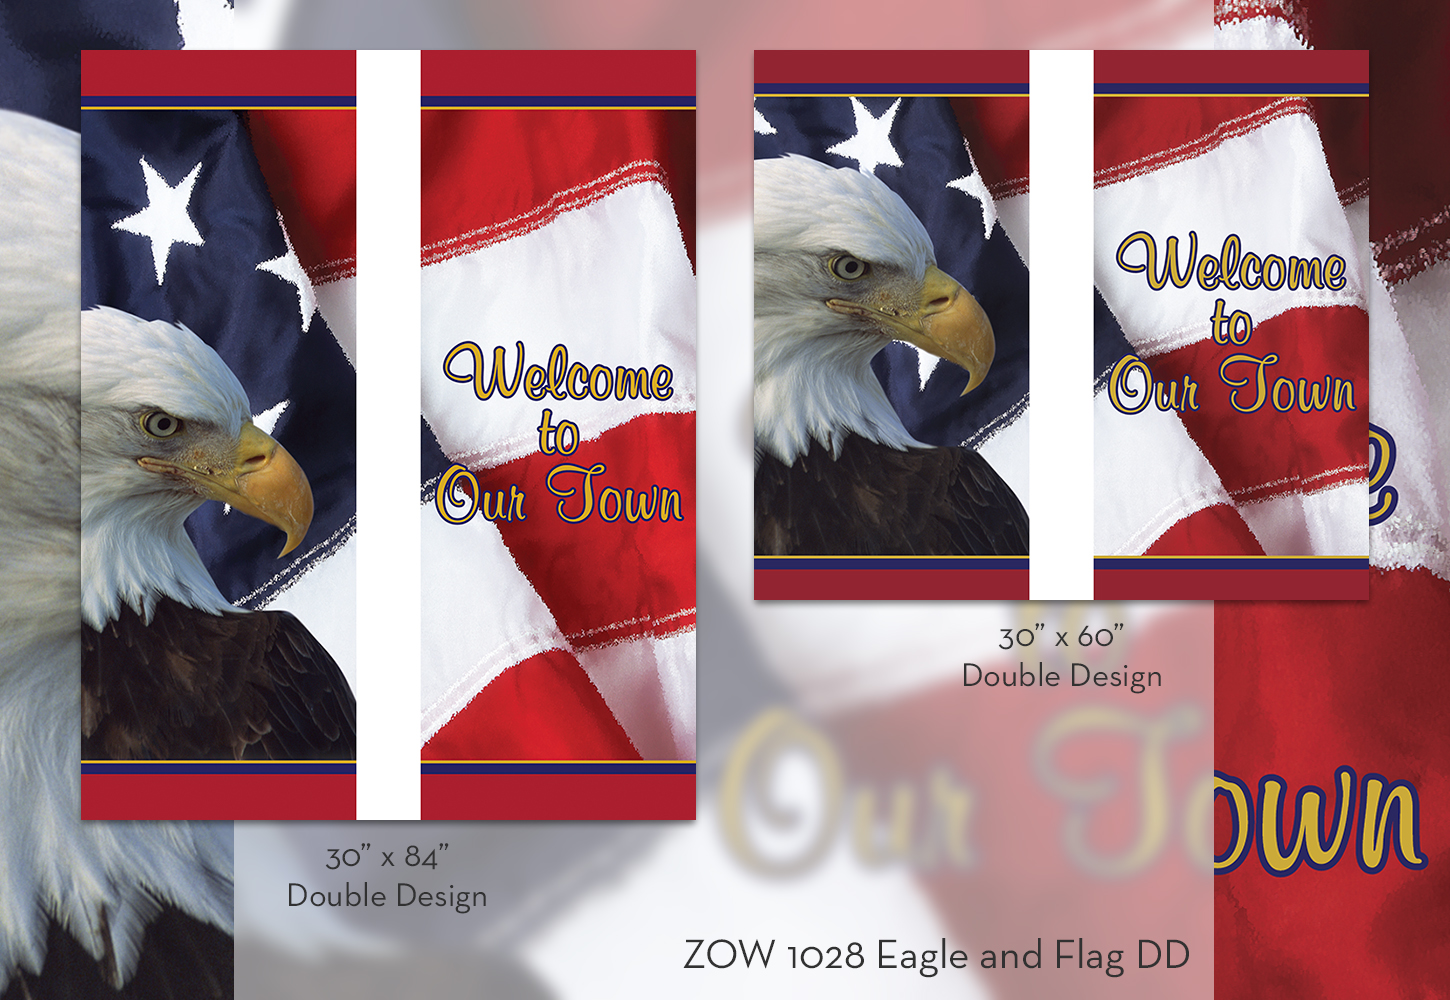 ZOW 1028 Eagle and Flag DD